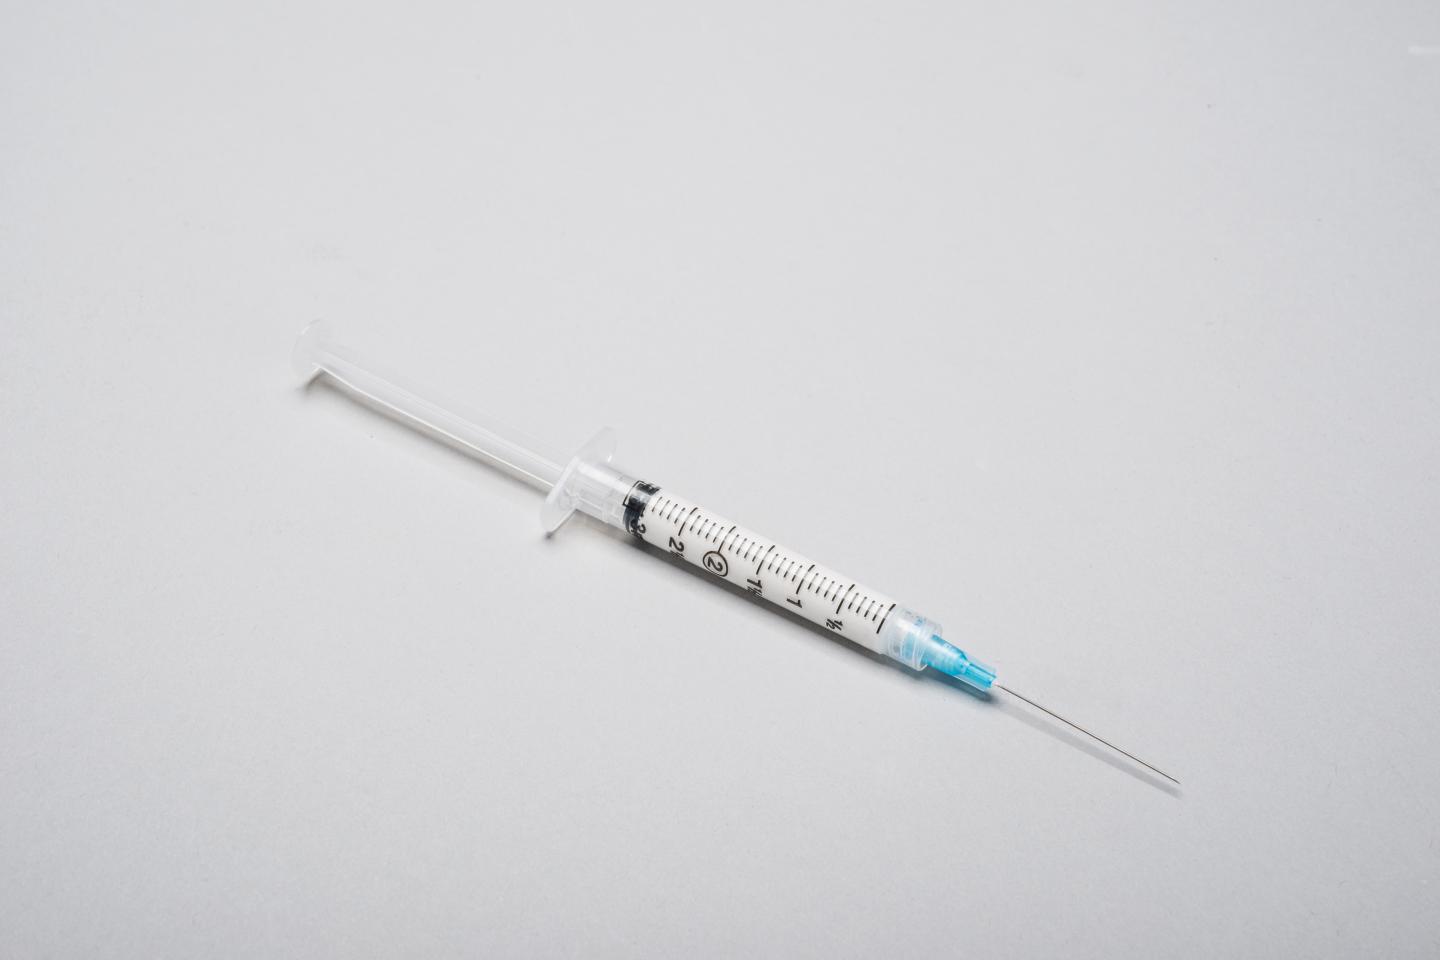 Syringe Filled with 3 mL of Long-acting Cabotegravir